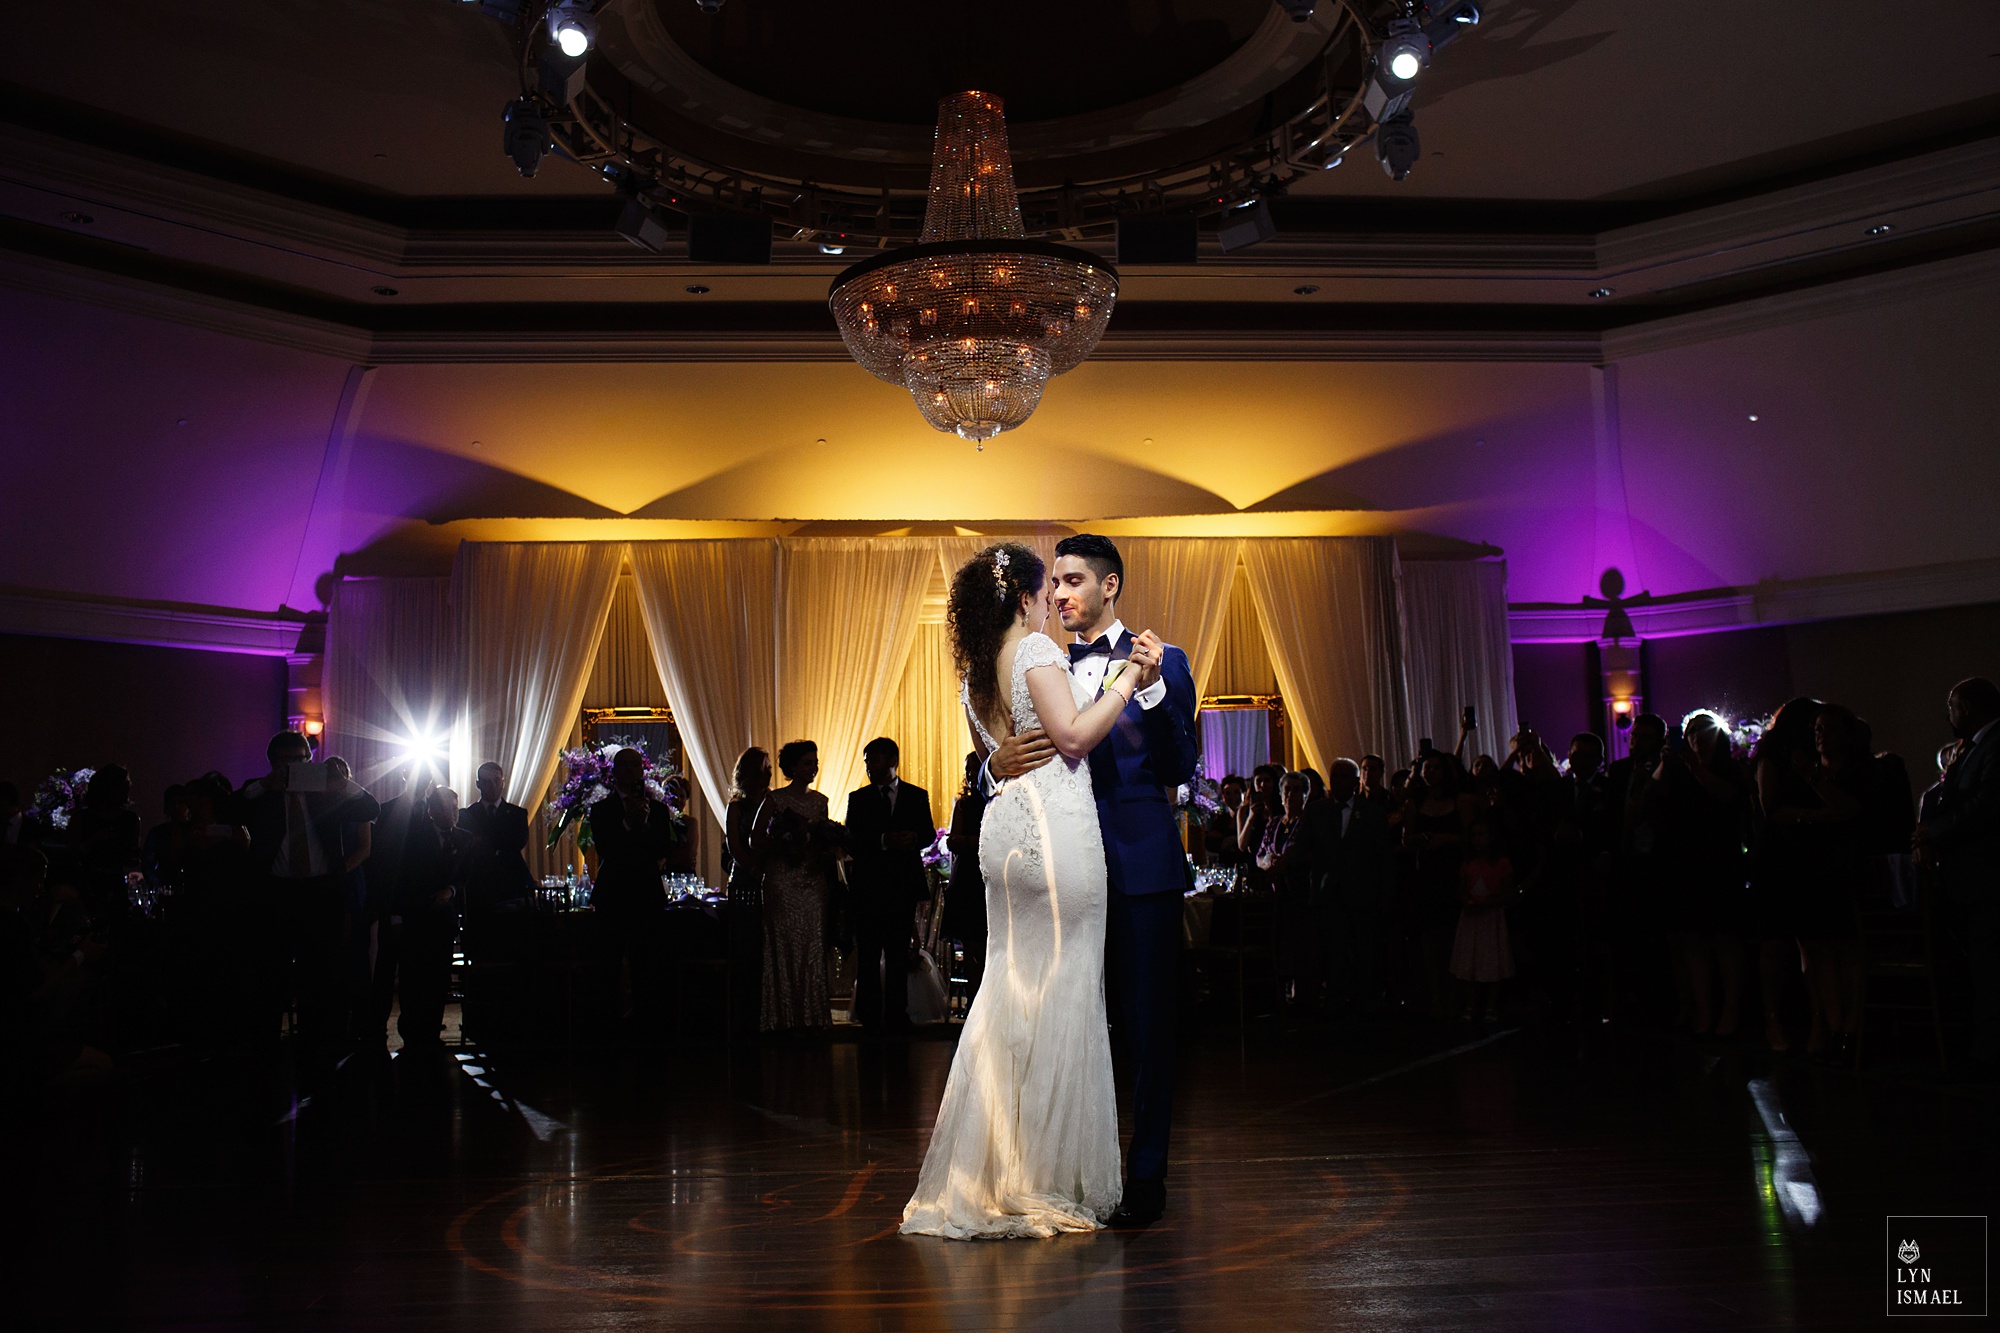 First dance at the Bellvue Manor